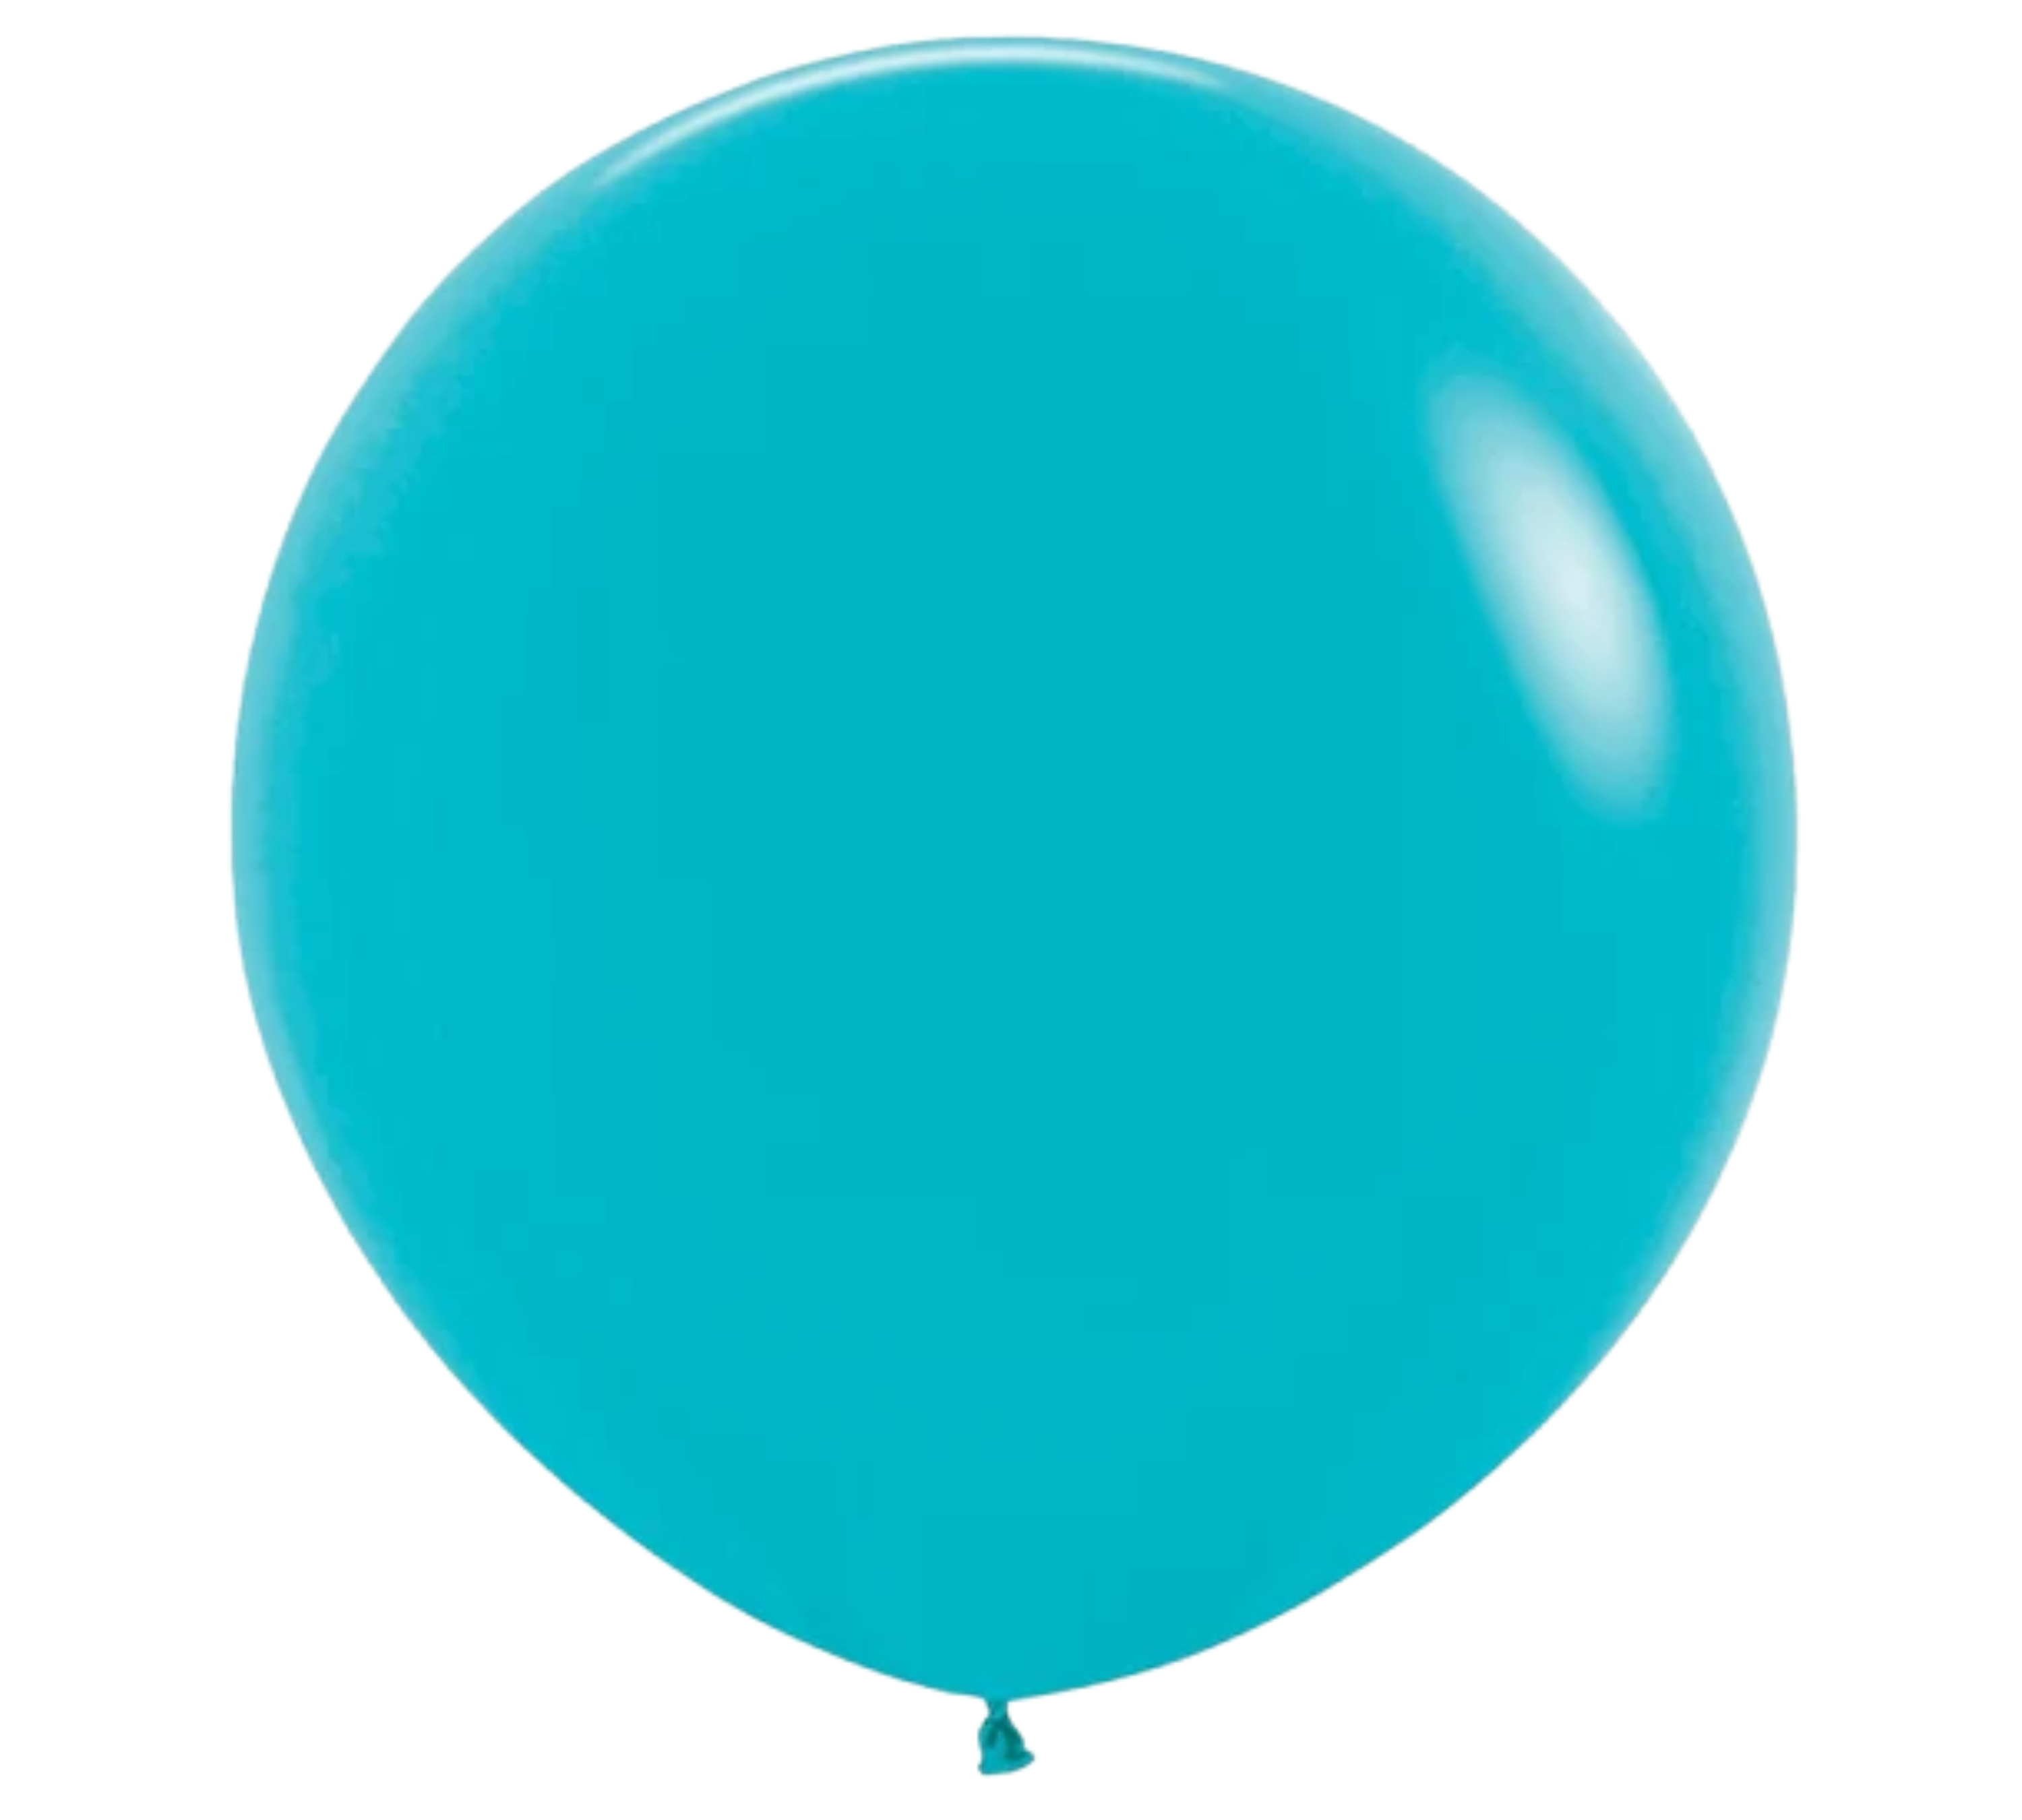 24" Sempertex Deluxe Turquoise Blue Latex Balloons | 10 Count